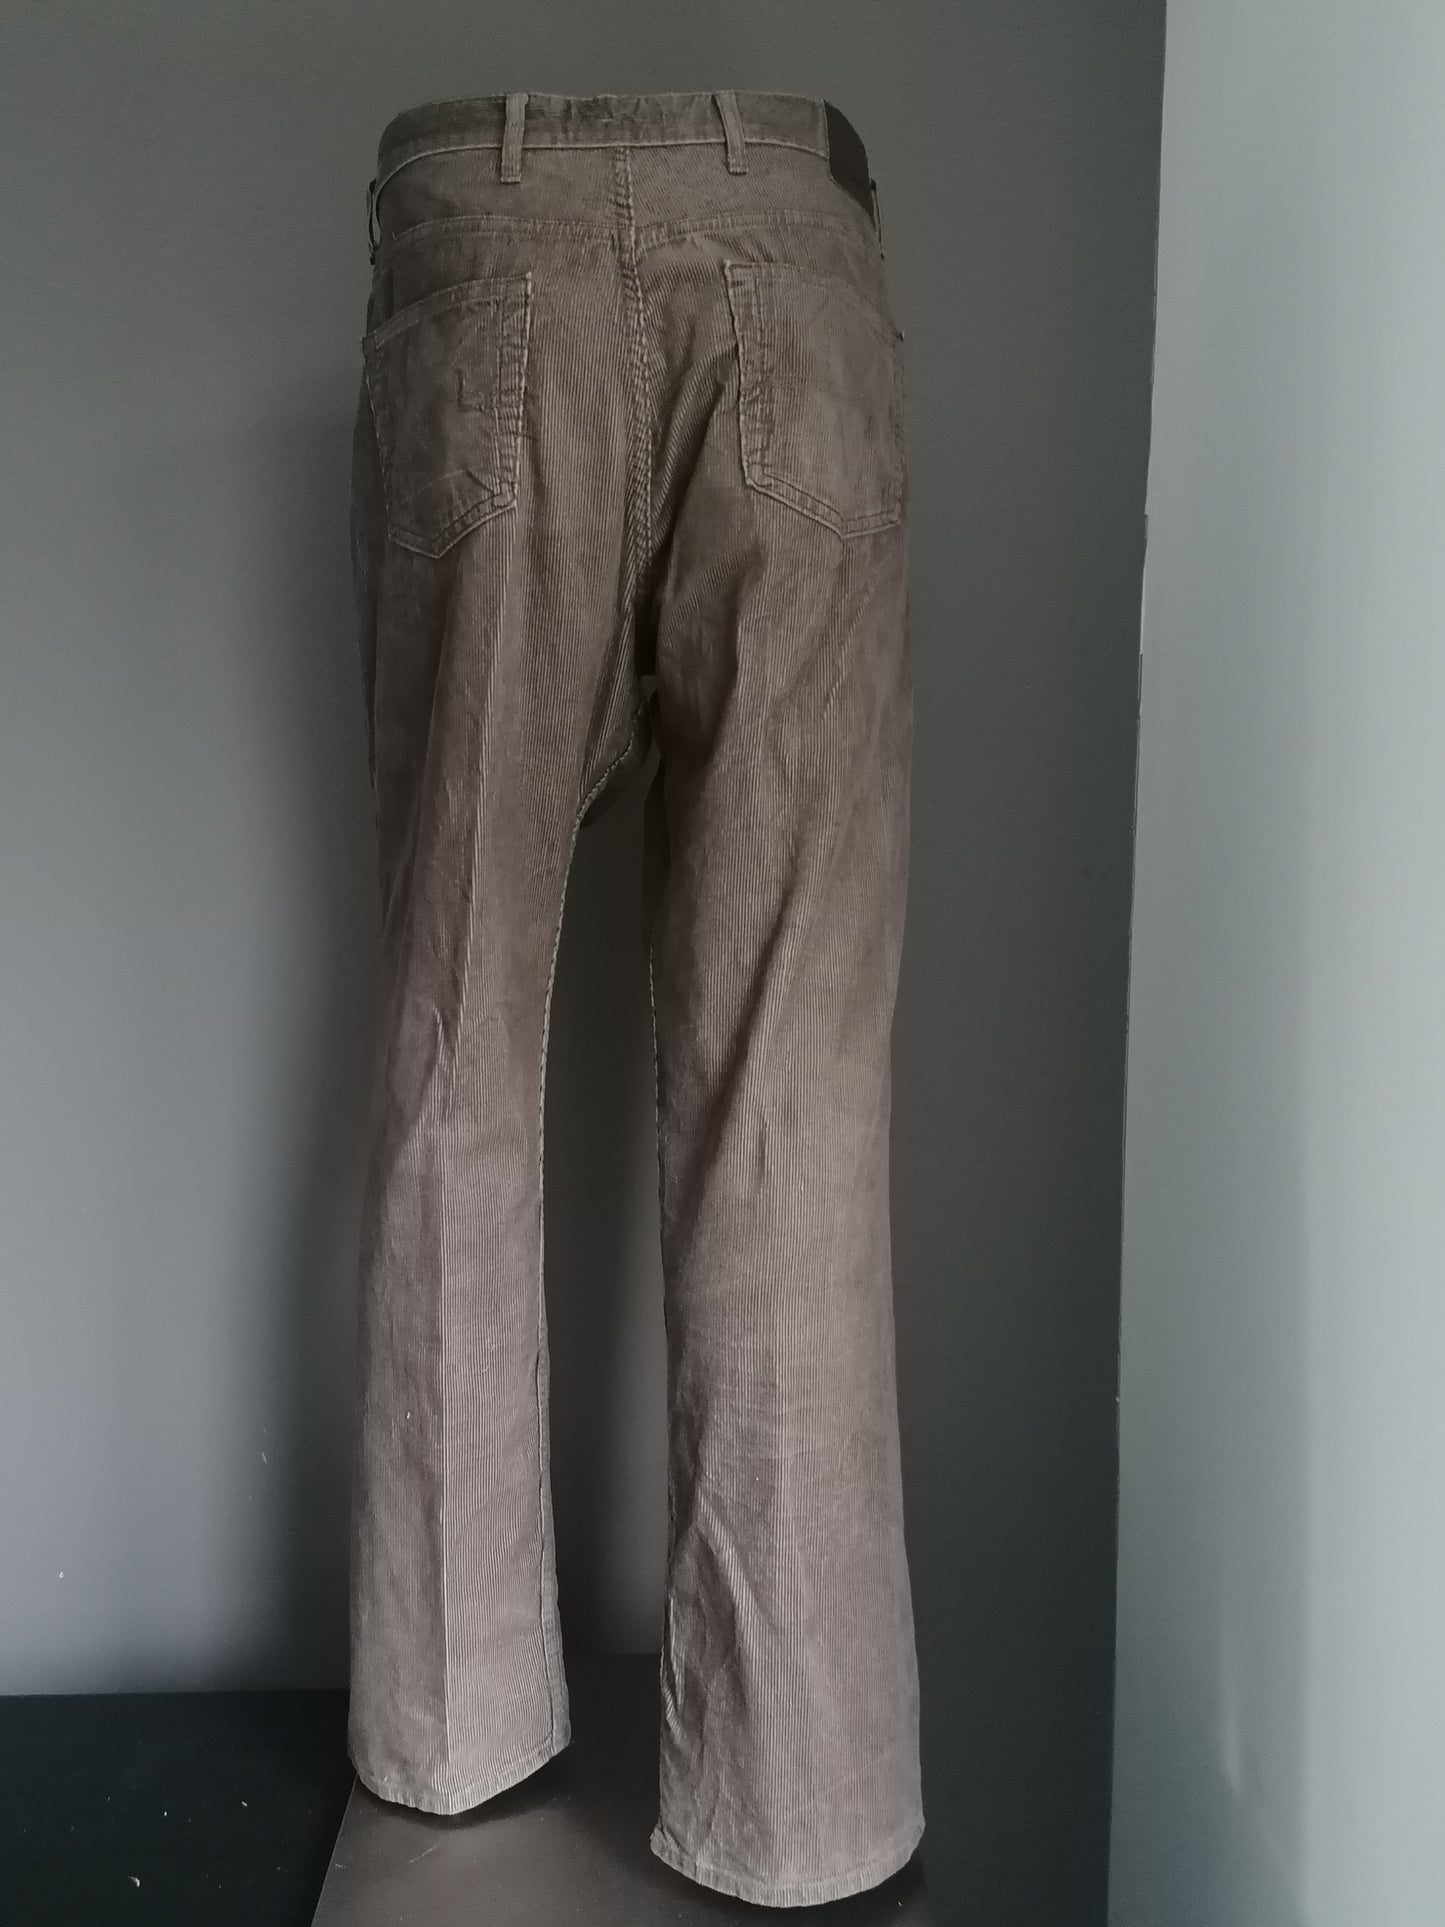 Marks & Spencer Rib Broek. Brown colored. Size 58 / XXL / 2XL.